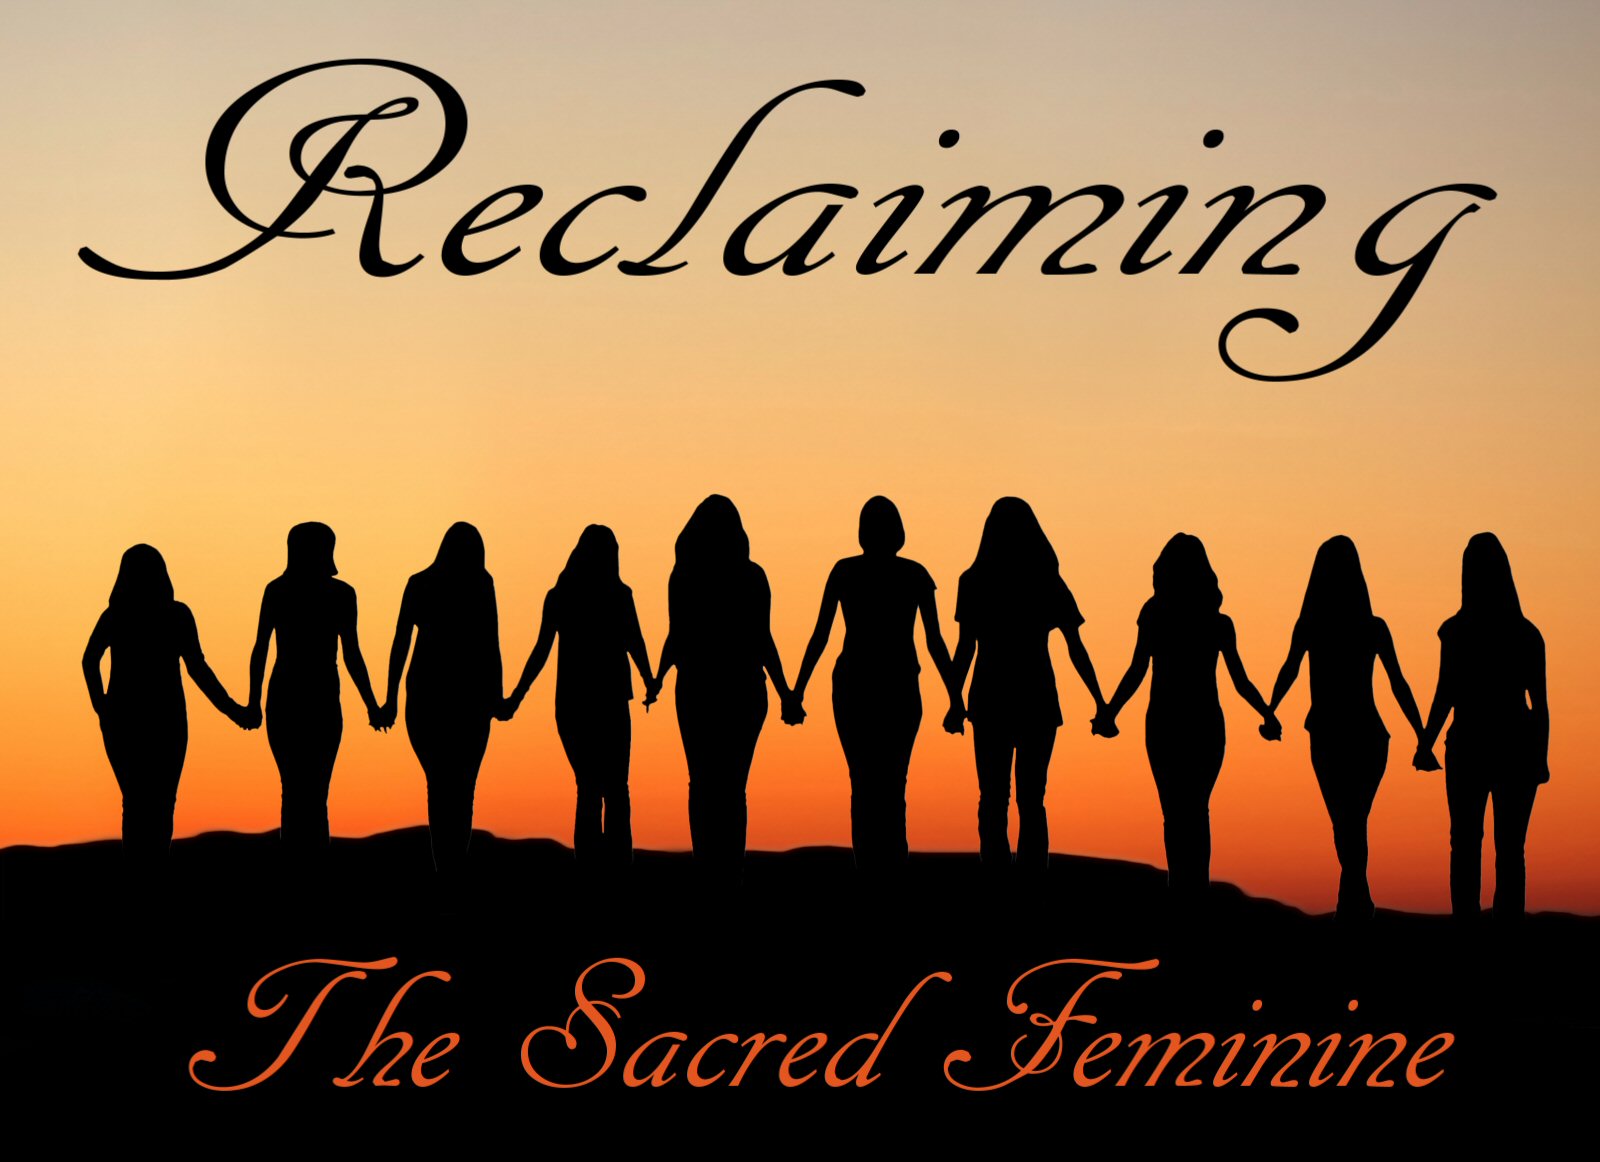 Reclaiming the Sacred Feminine Workshop and Lecture